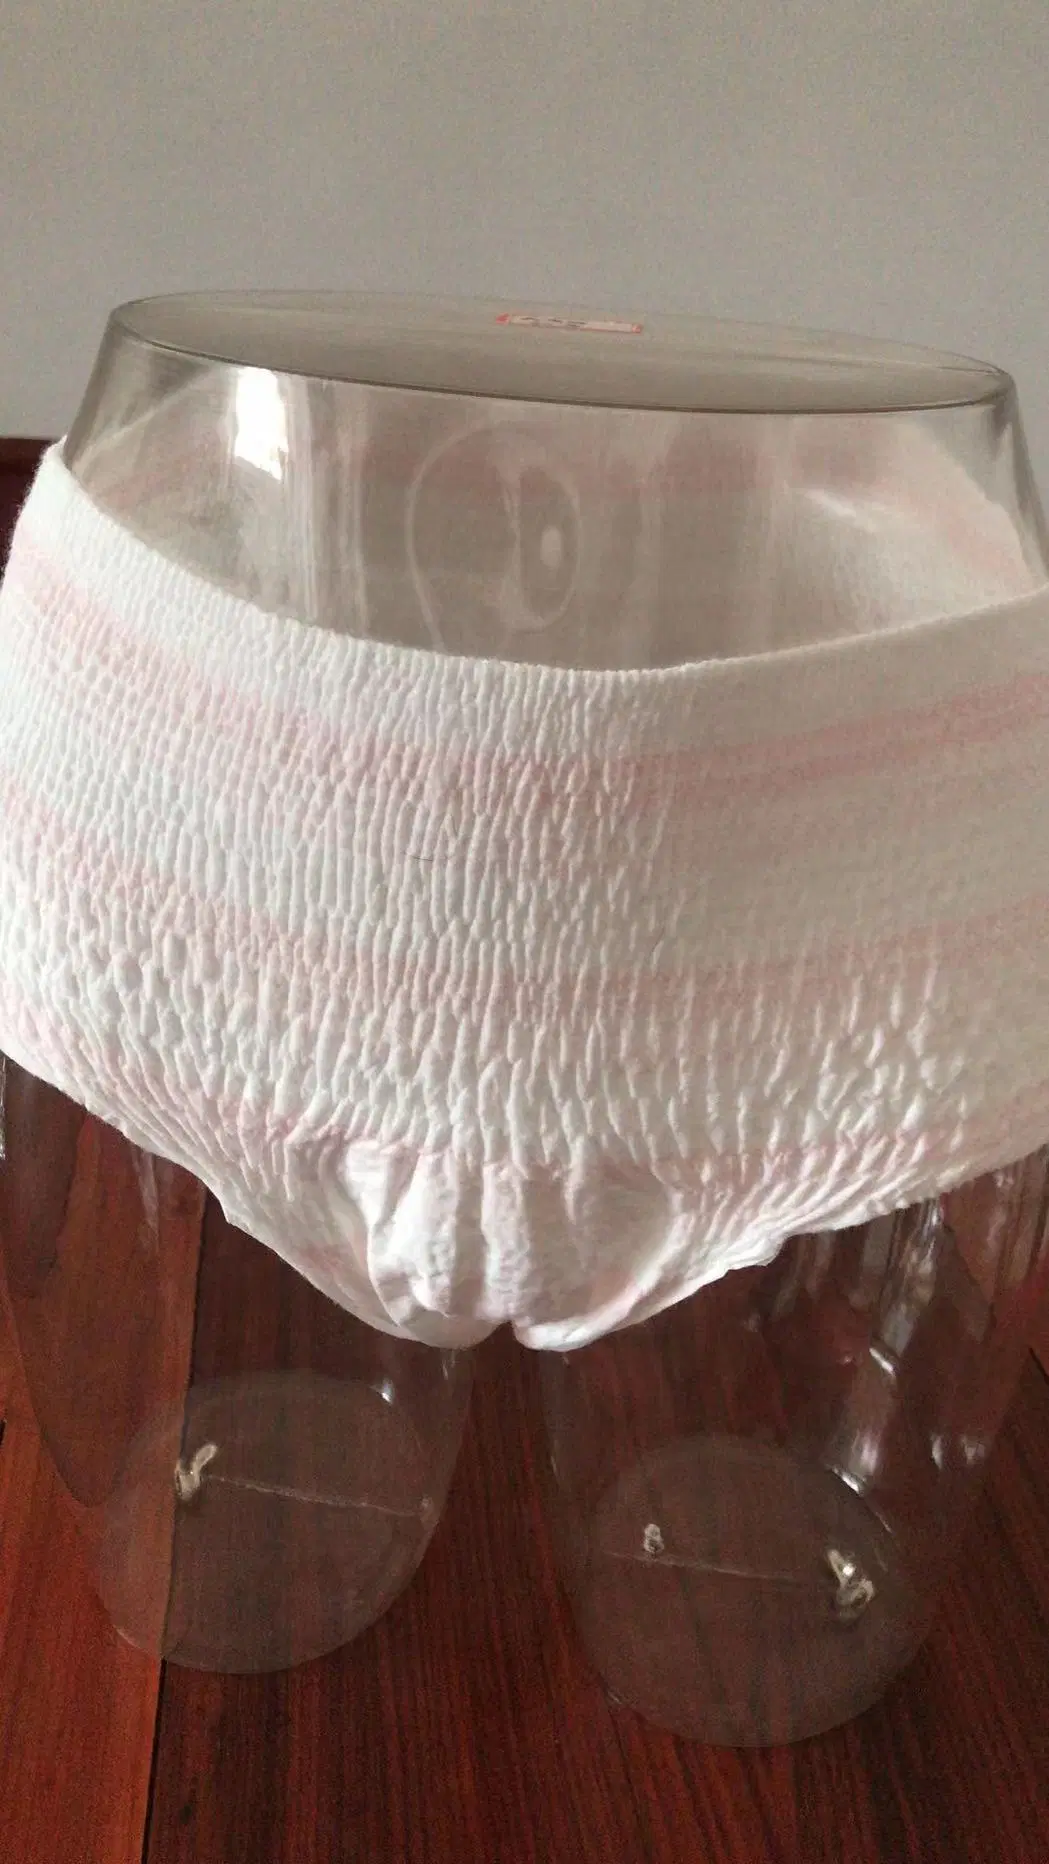 Urinary Incontinence Period Underwear That Absorbs Your Period Leak Proof